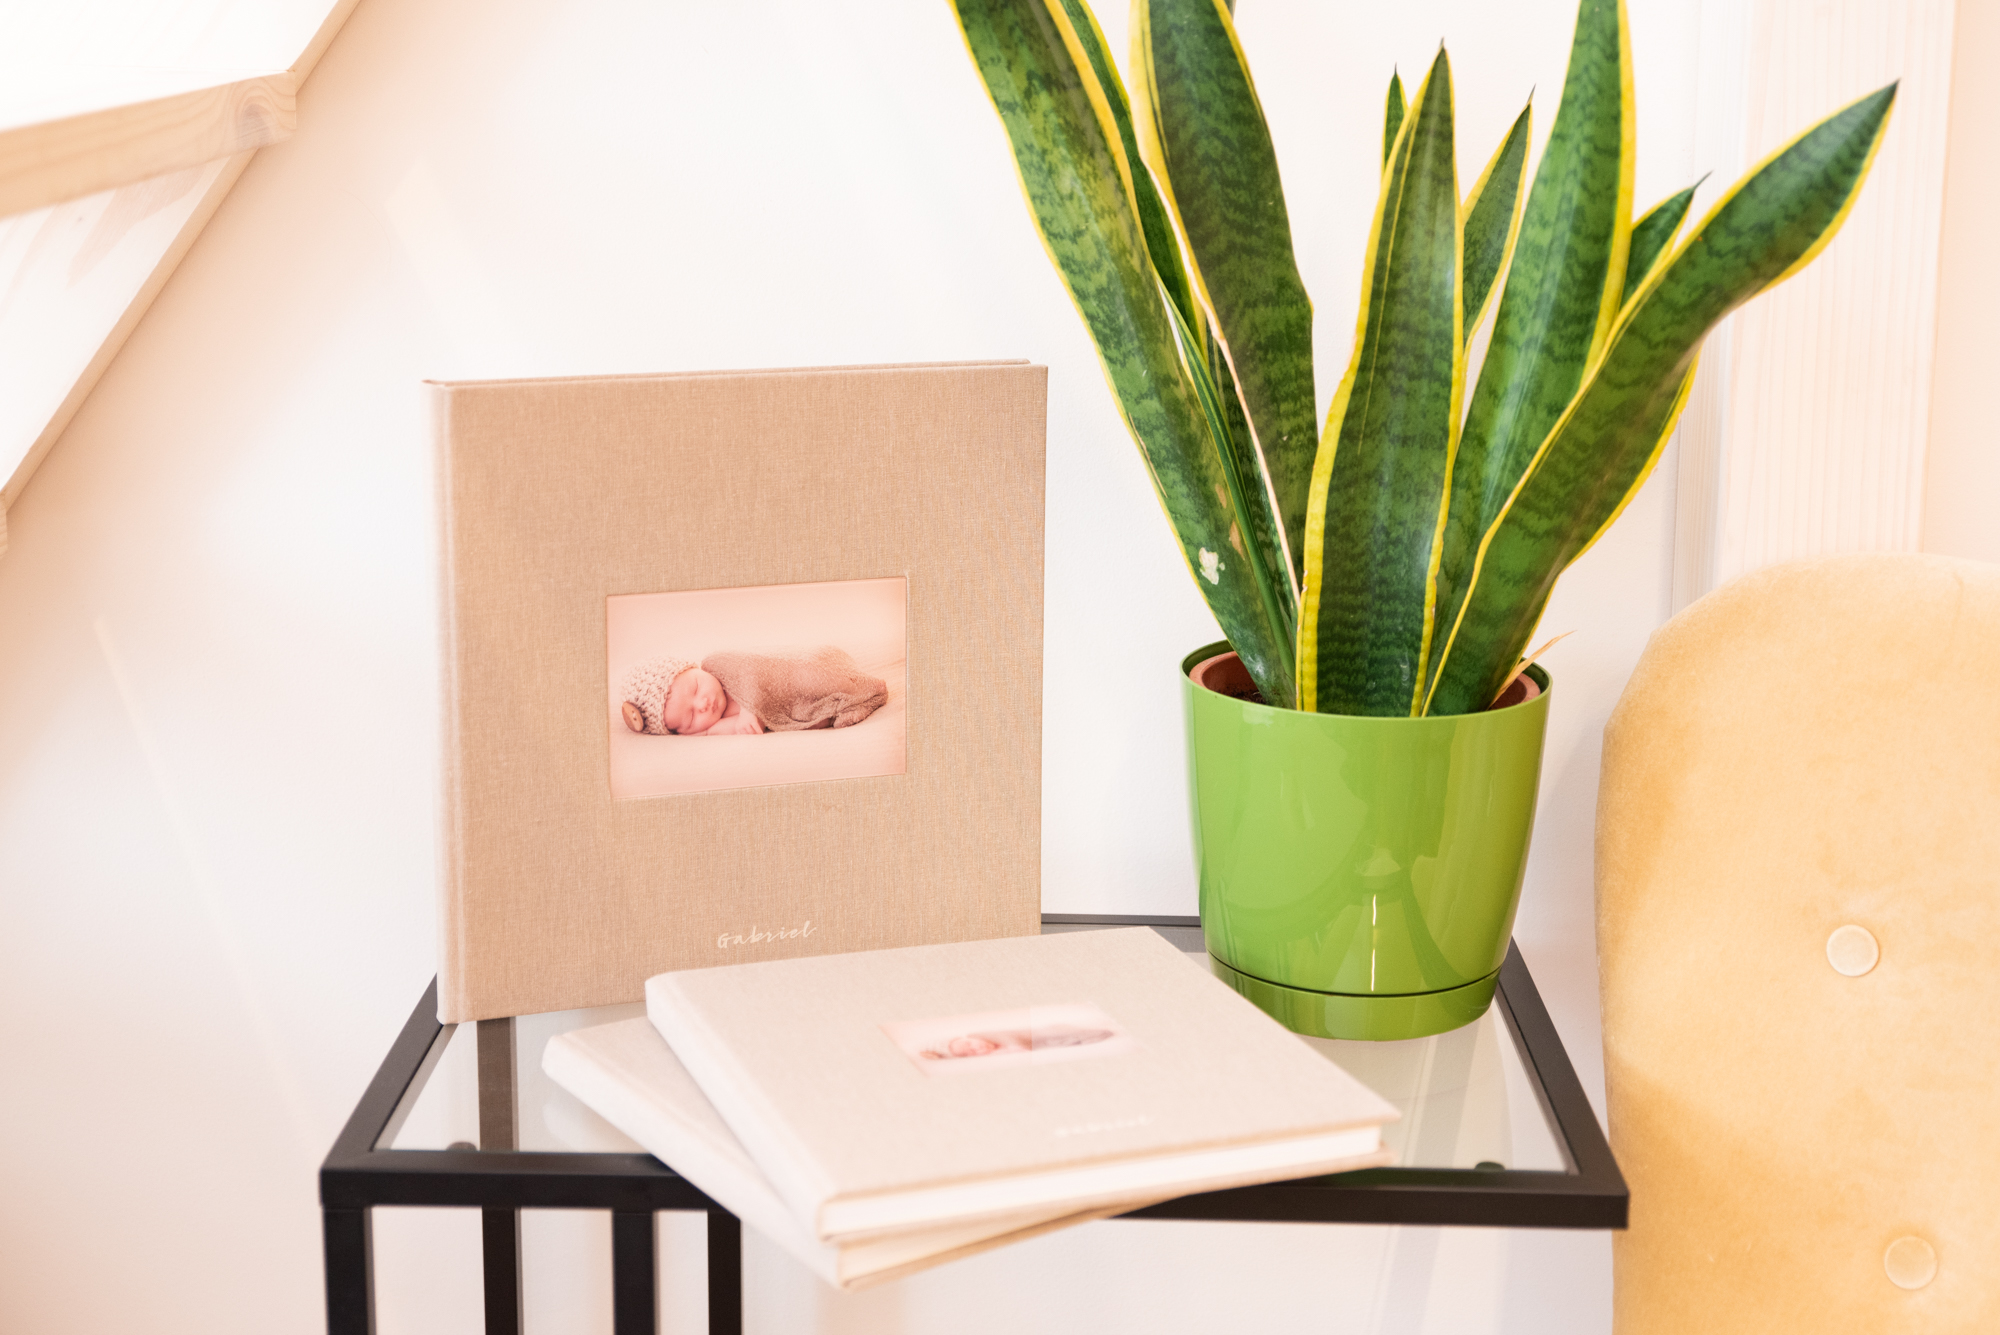 Professional Photo Album with cut-out window and newborn photography